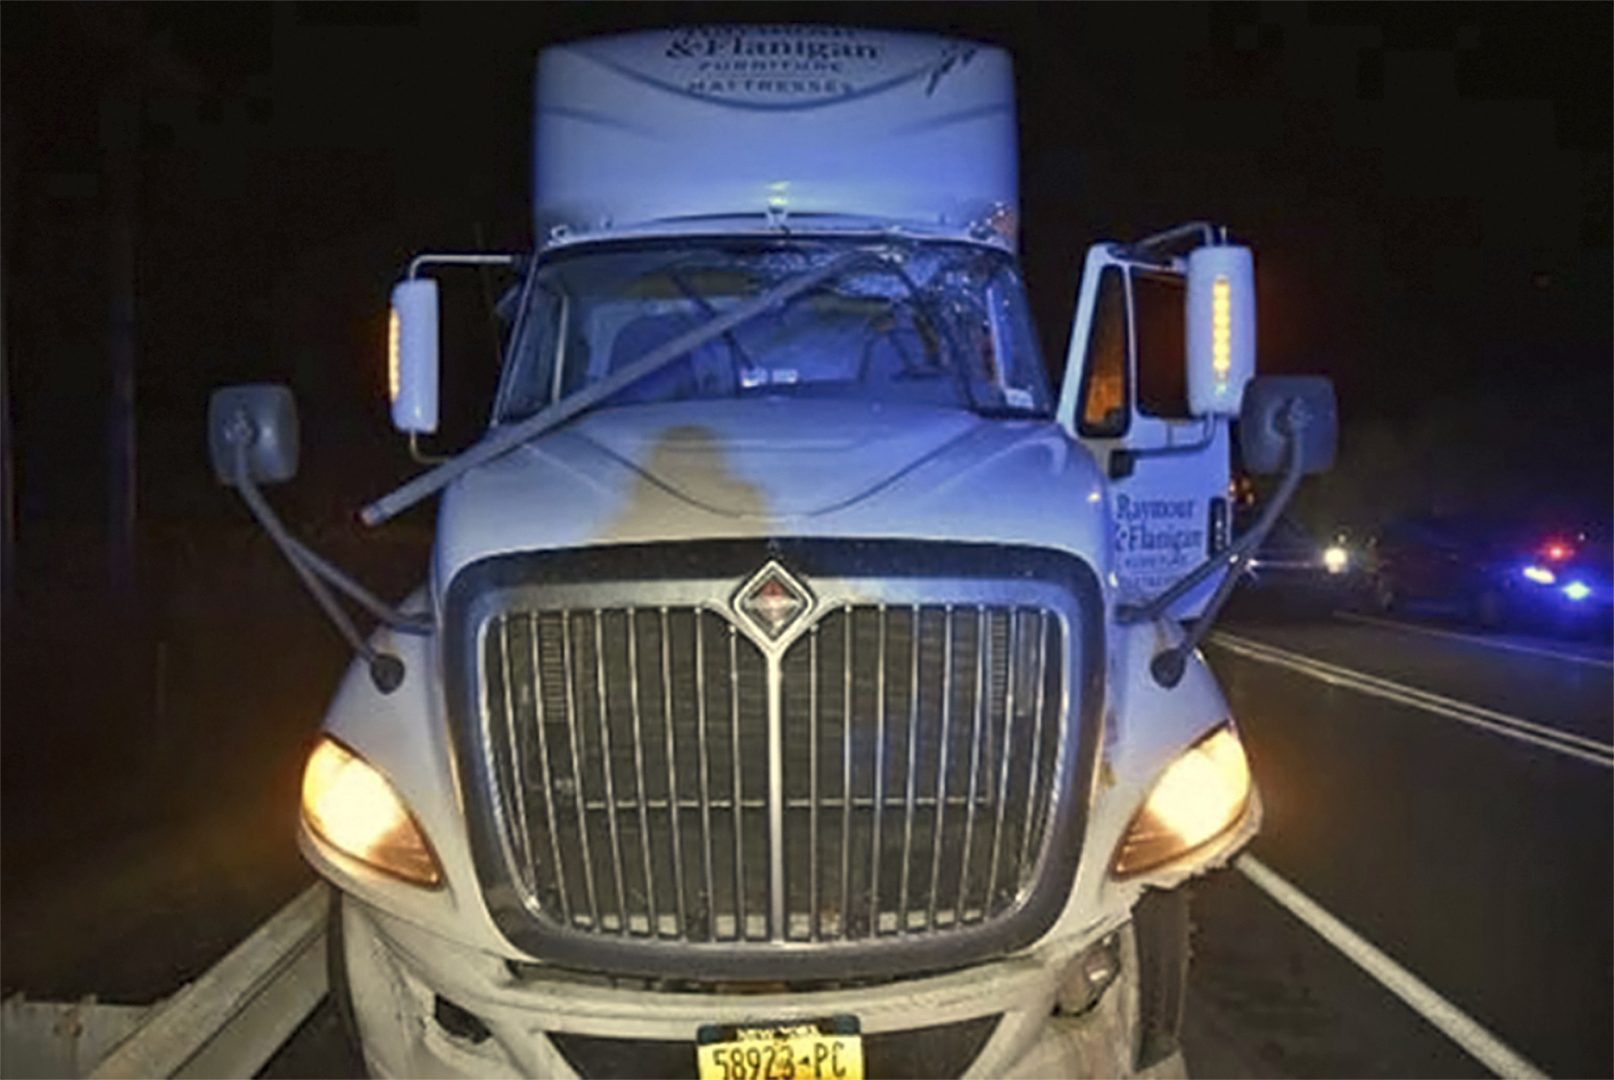 This photo provided by the Pennsylvania State Police shows a truck's windshield damaged by a 10-foot section of electrical conduit that struck the driver in the head, killing him, on Feb. 21, 2018. The conduit broke away from the ceiling of the Lehigh Tunnel along the Pennsylvania Turnpike in East Penn Township, Carbon County, Pa. In a preliminary report issued Tuesday, May 1, 2018, by the National Transportation Safety Board, federal investigators say steel straps holding electrical conduits to the tunnel's ceiling had corroded before the accident that killed 70-year-old Howard Sexton III, of Mickleton, N.J.